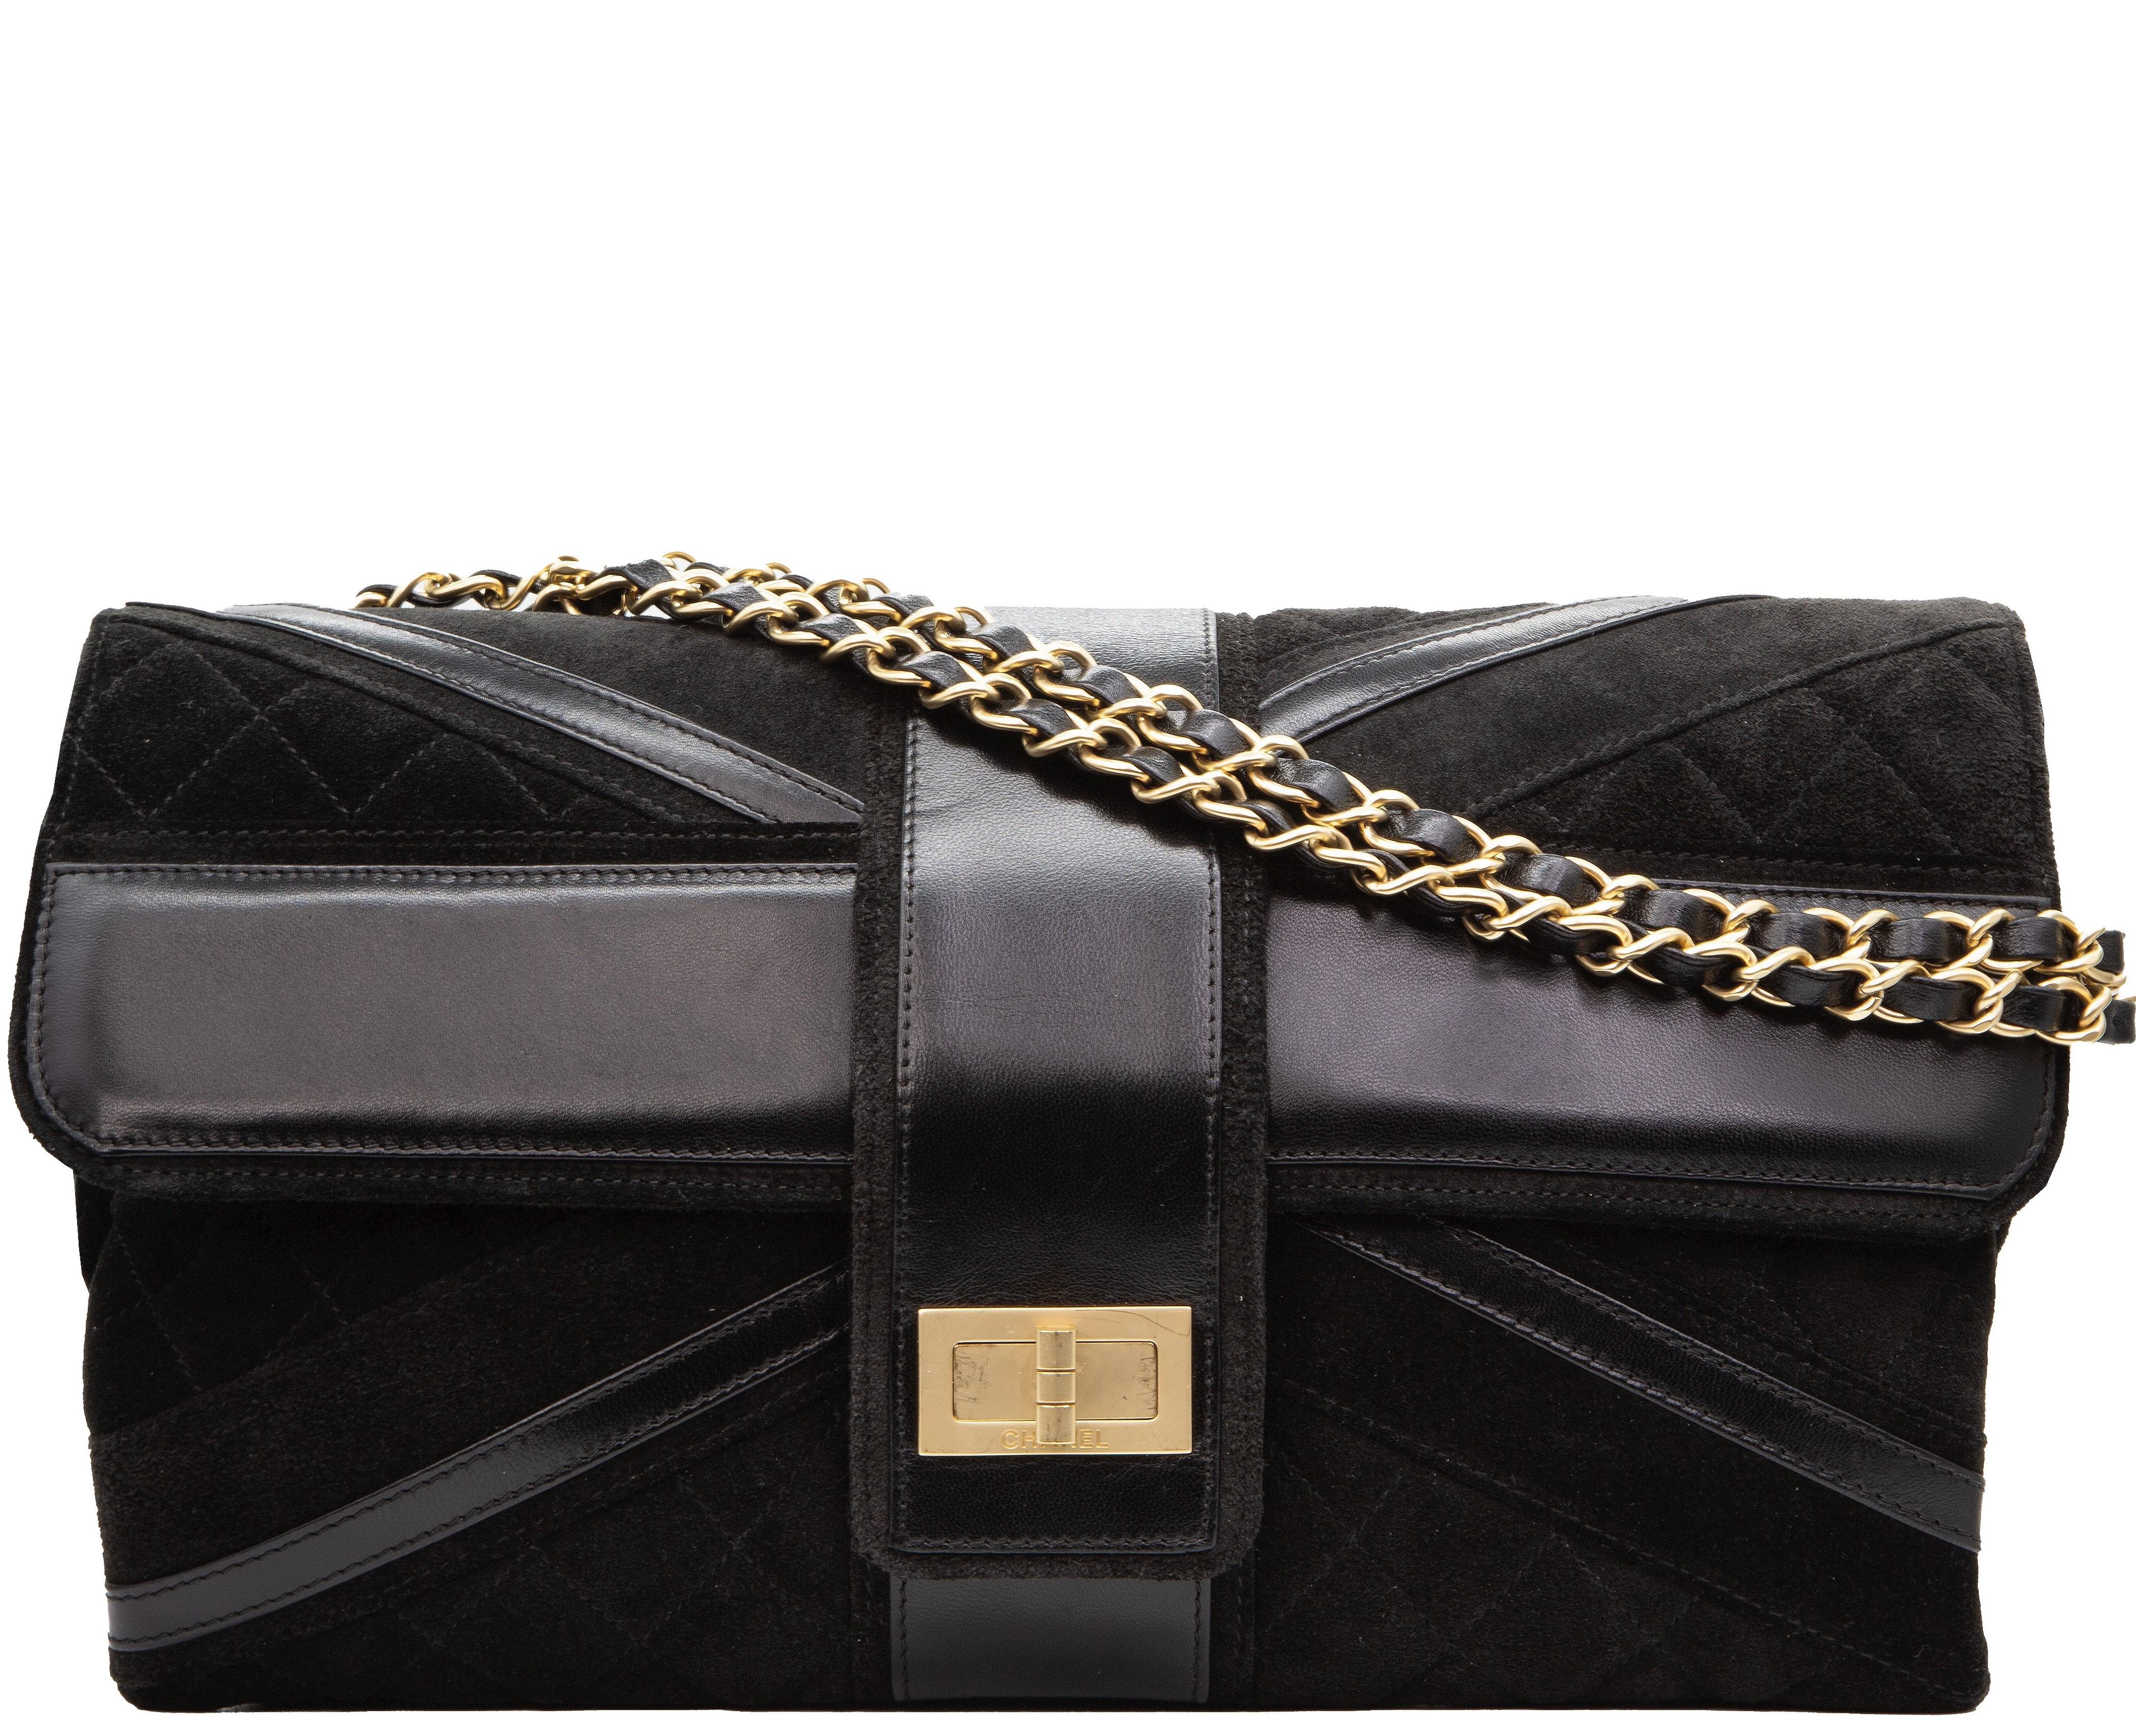 Crafted in suede and lambskin leather, this limited edition Chanel flap bag showcases the coveted union jack pattern. A beautiful gold hardware turn lock opens the bag to the main compartment and the woven chain leather strap can be worn as both a